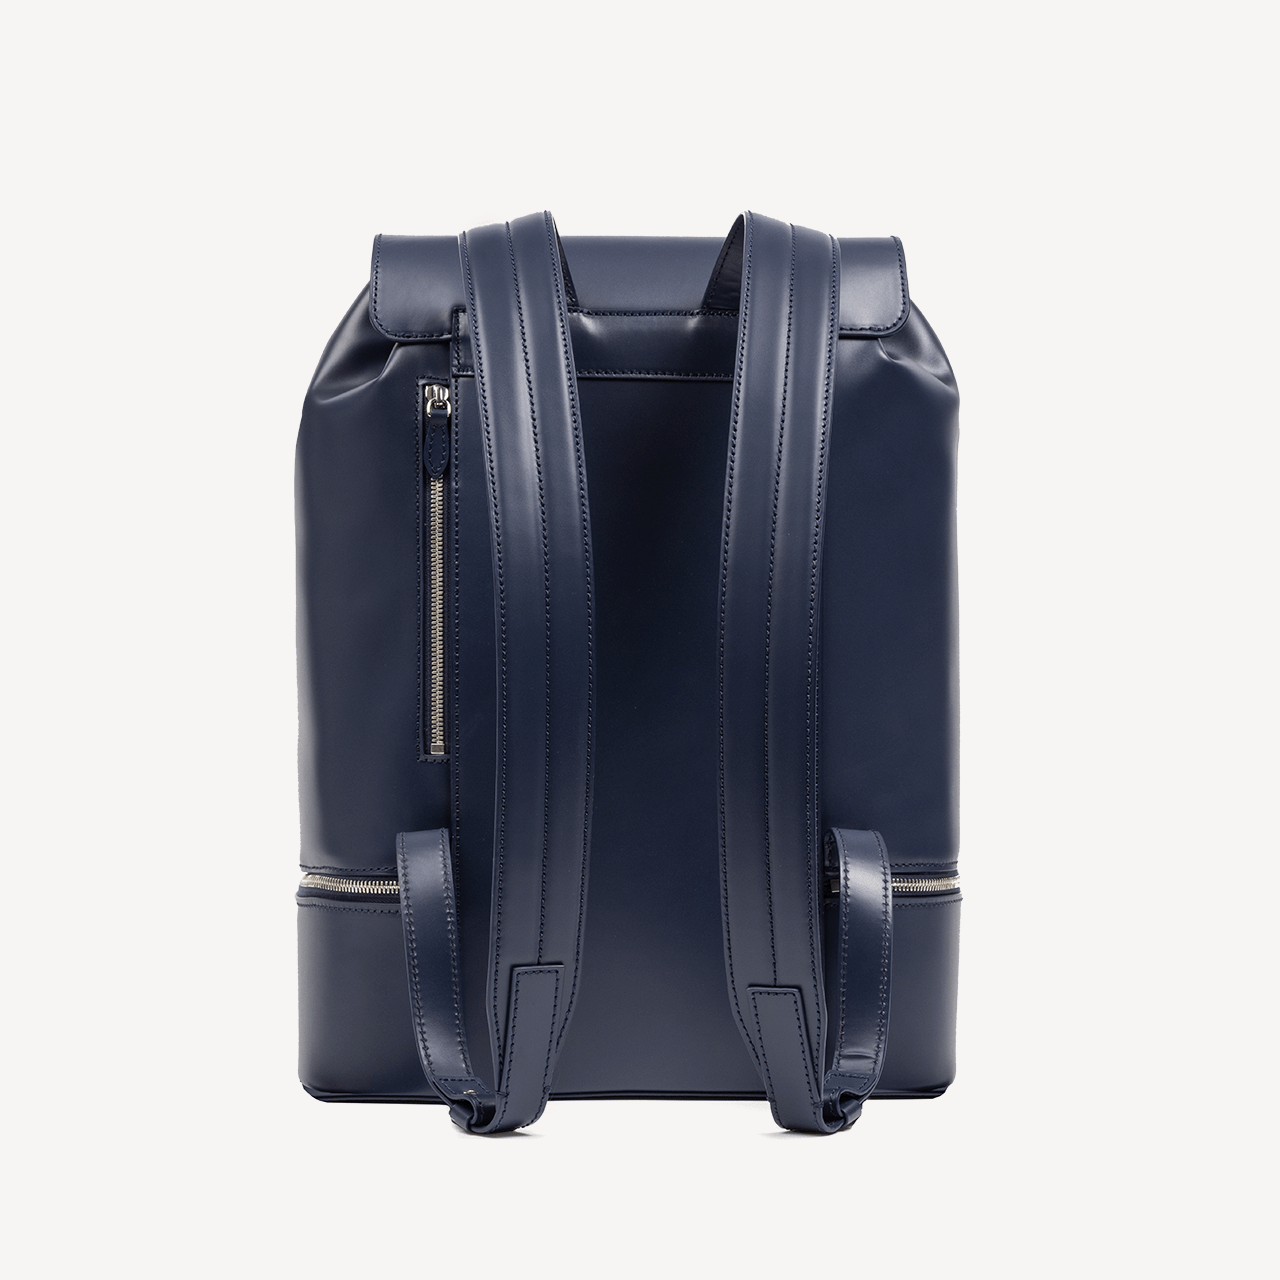 Nomad Backpack - Navy - Swaine